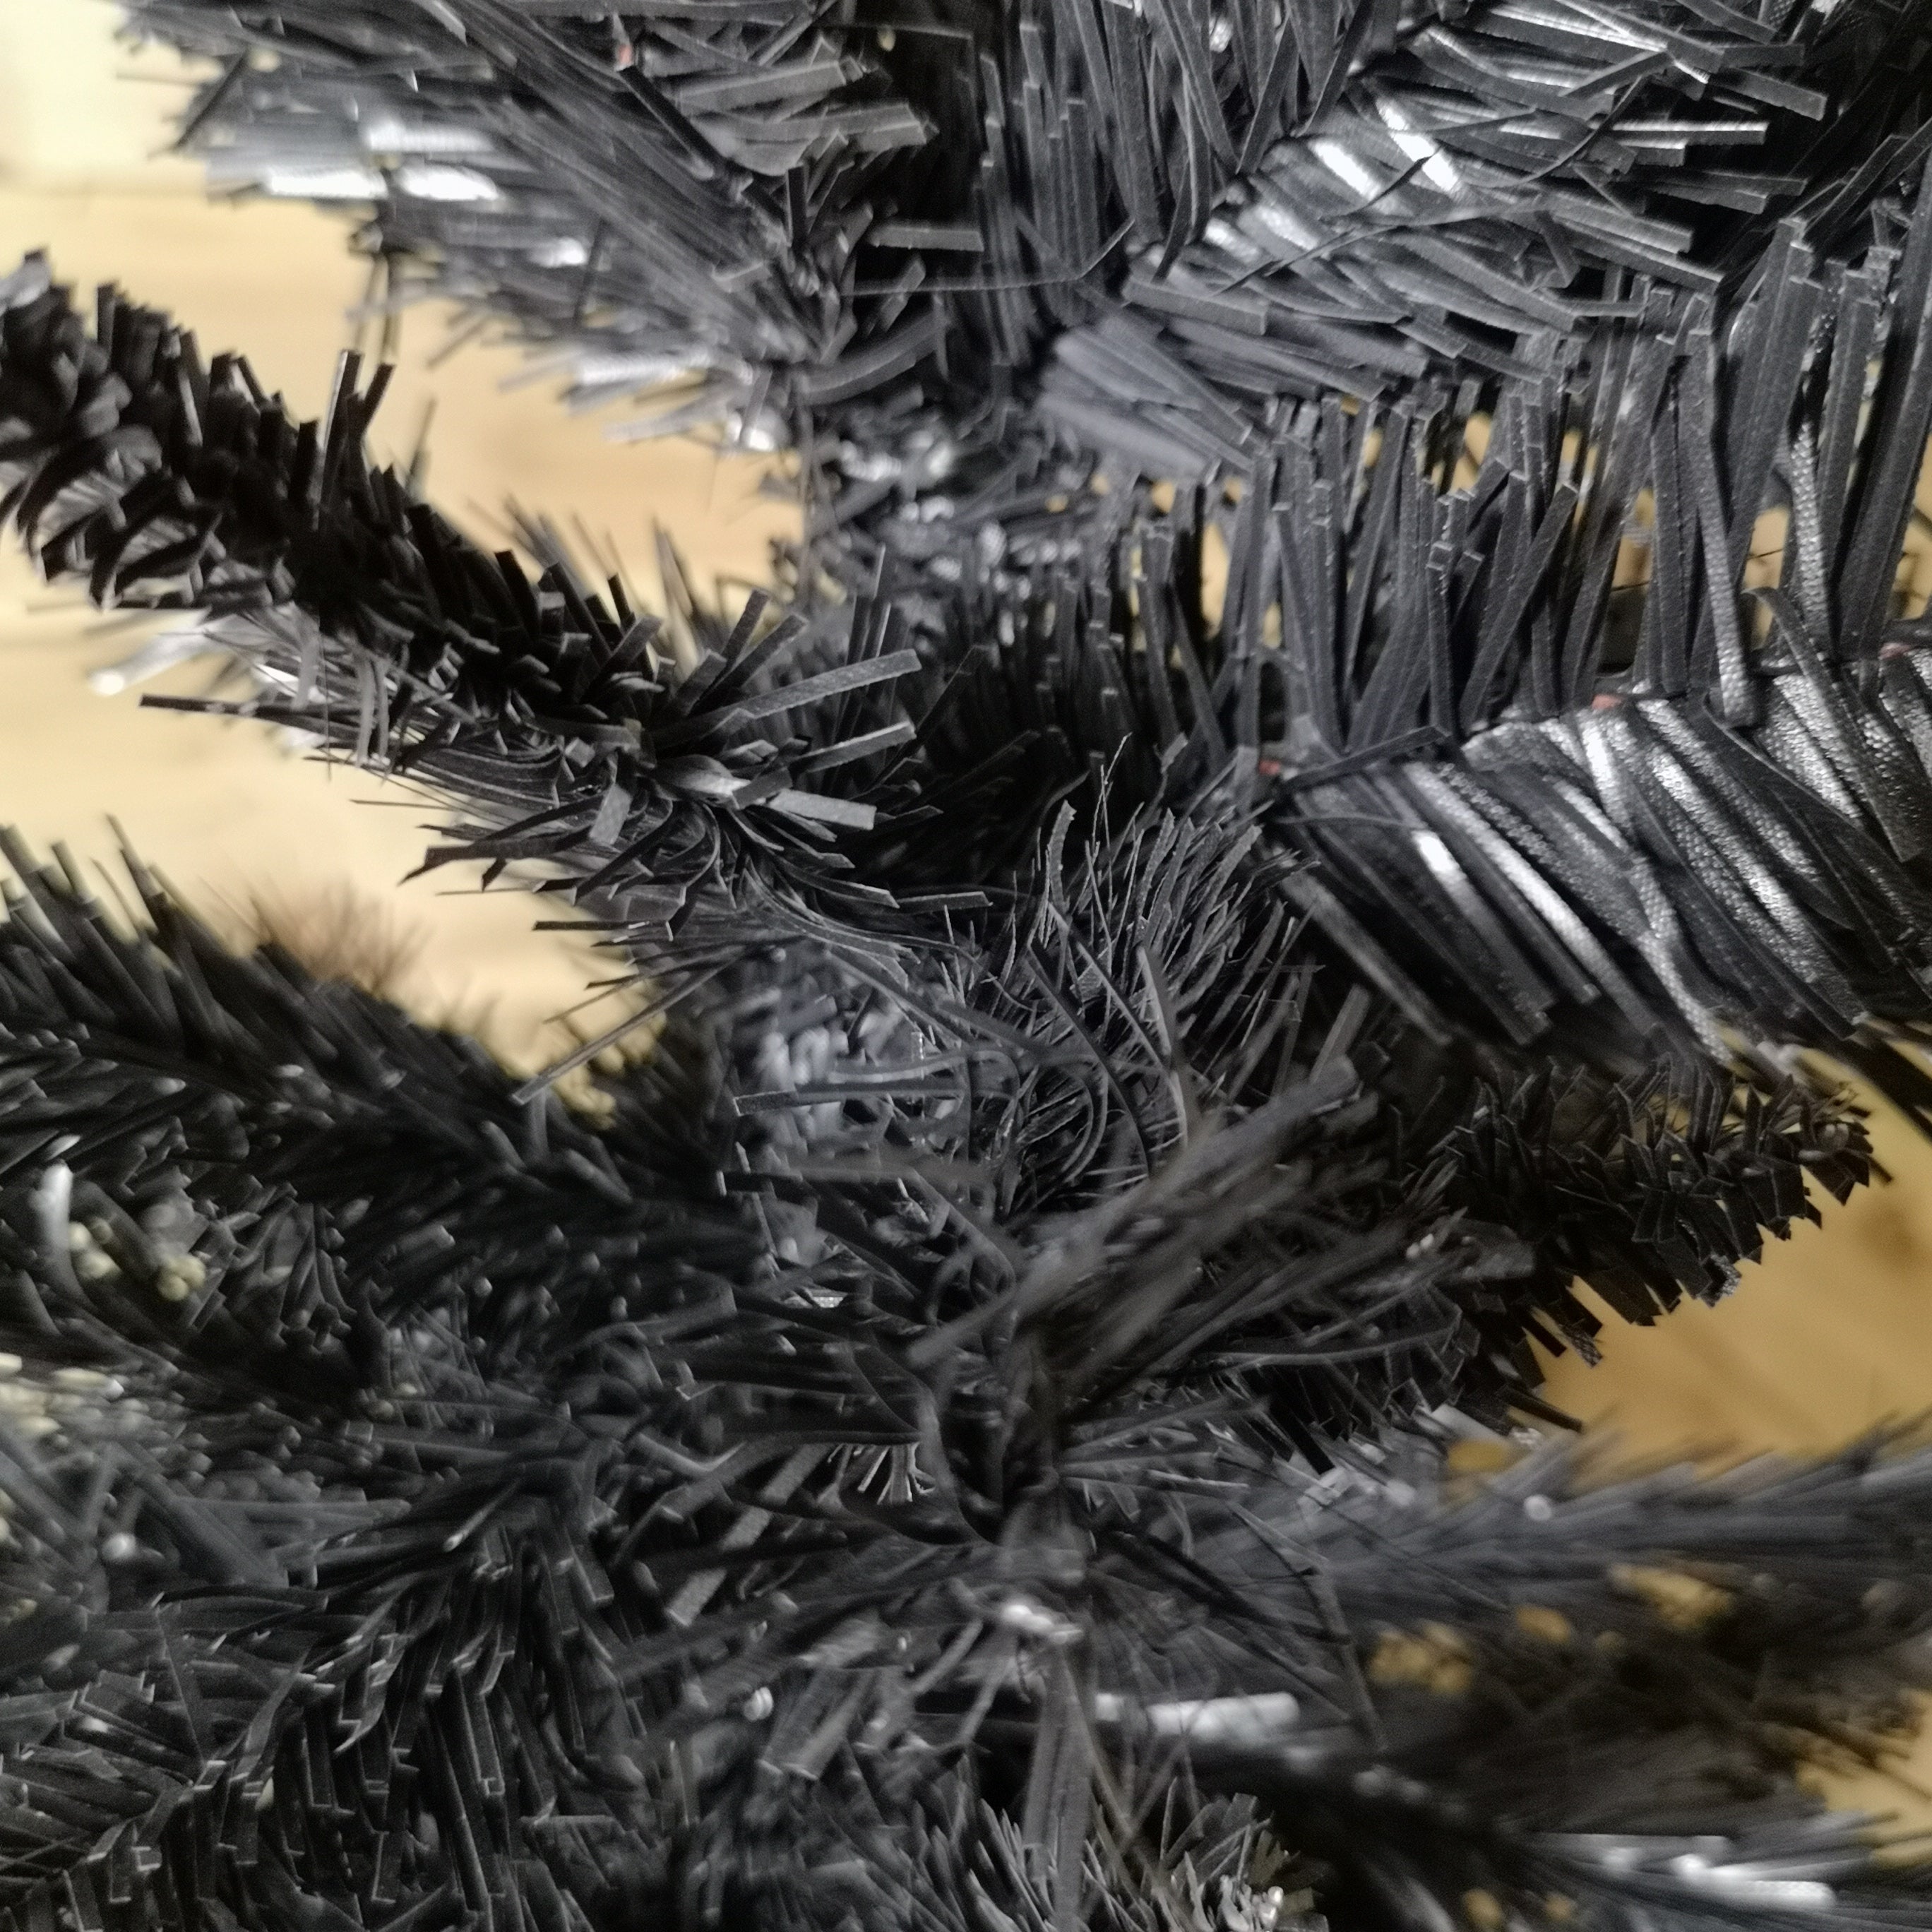 5ft (150cm) Black Pencil Pine Christmas Tree with 236 Tips